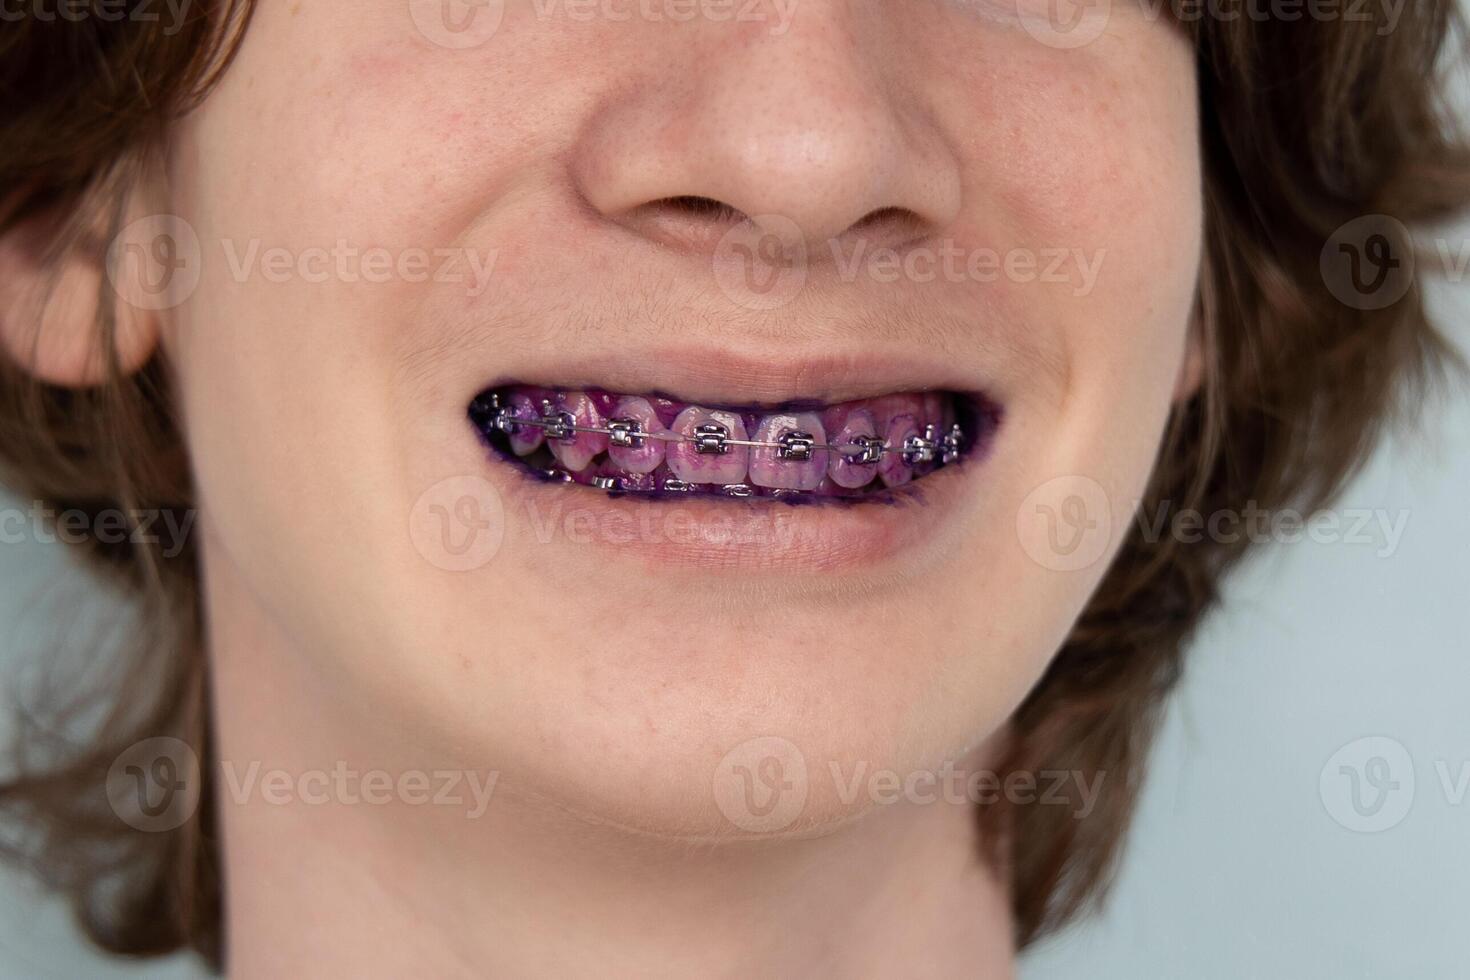 Plaque indicator on human teeth with braces. Plaque is colored pink. Teenager using plaque indicator gel photo